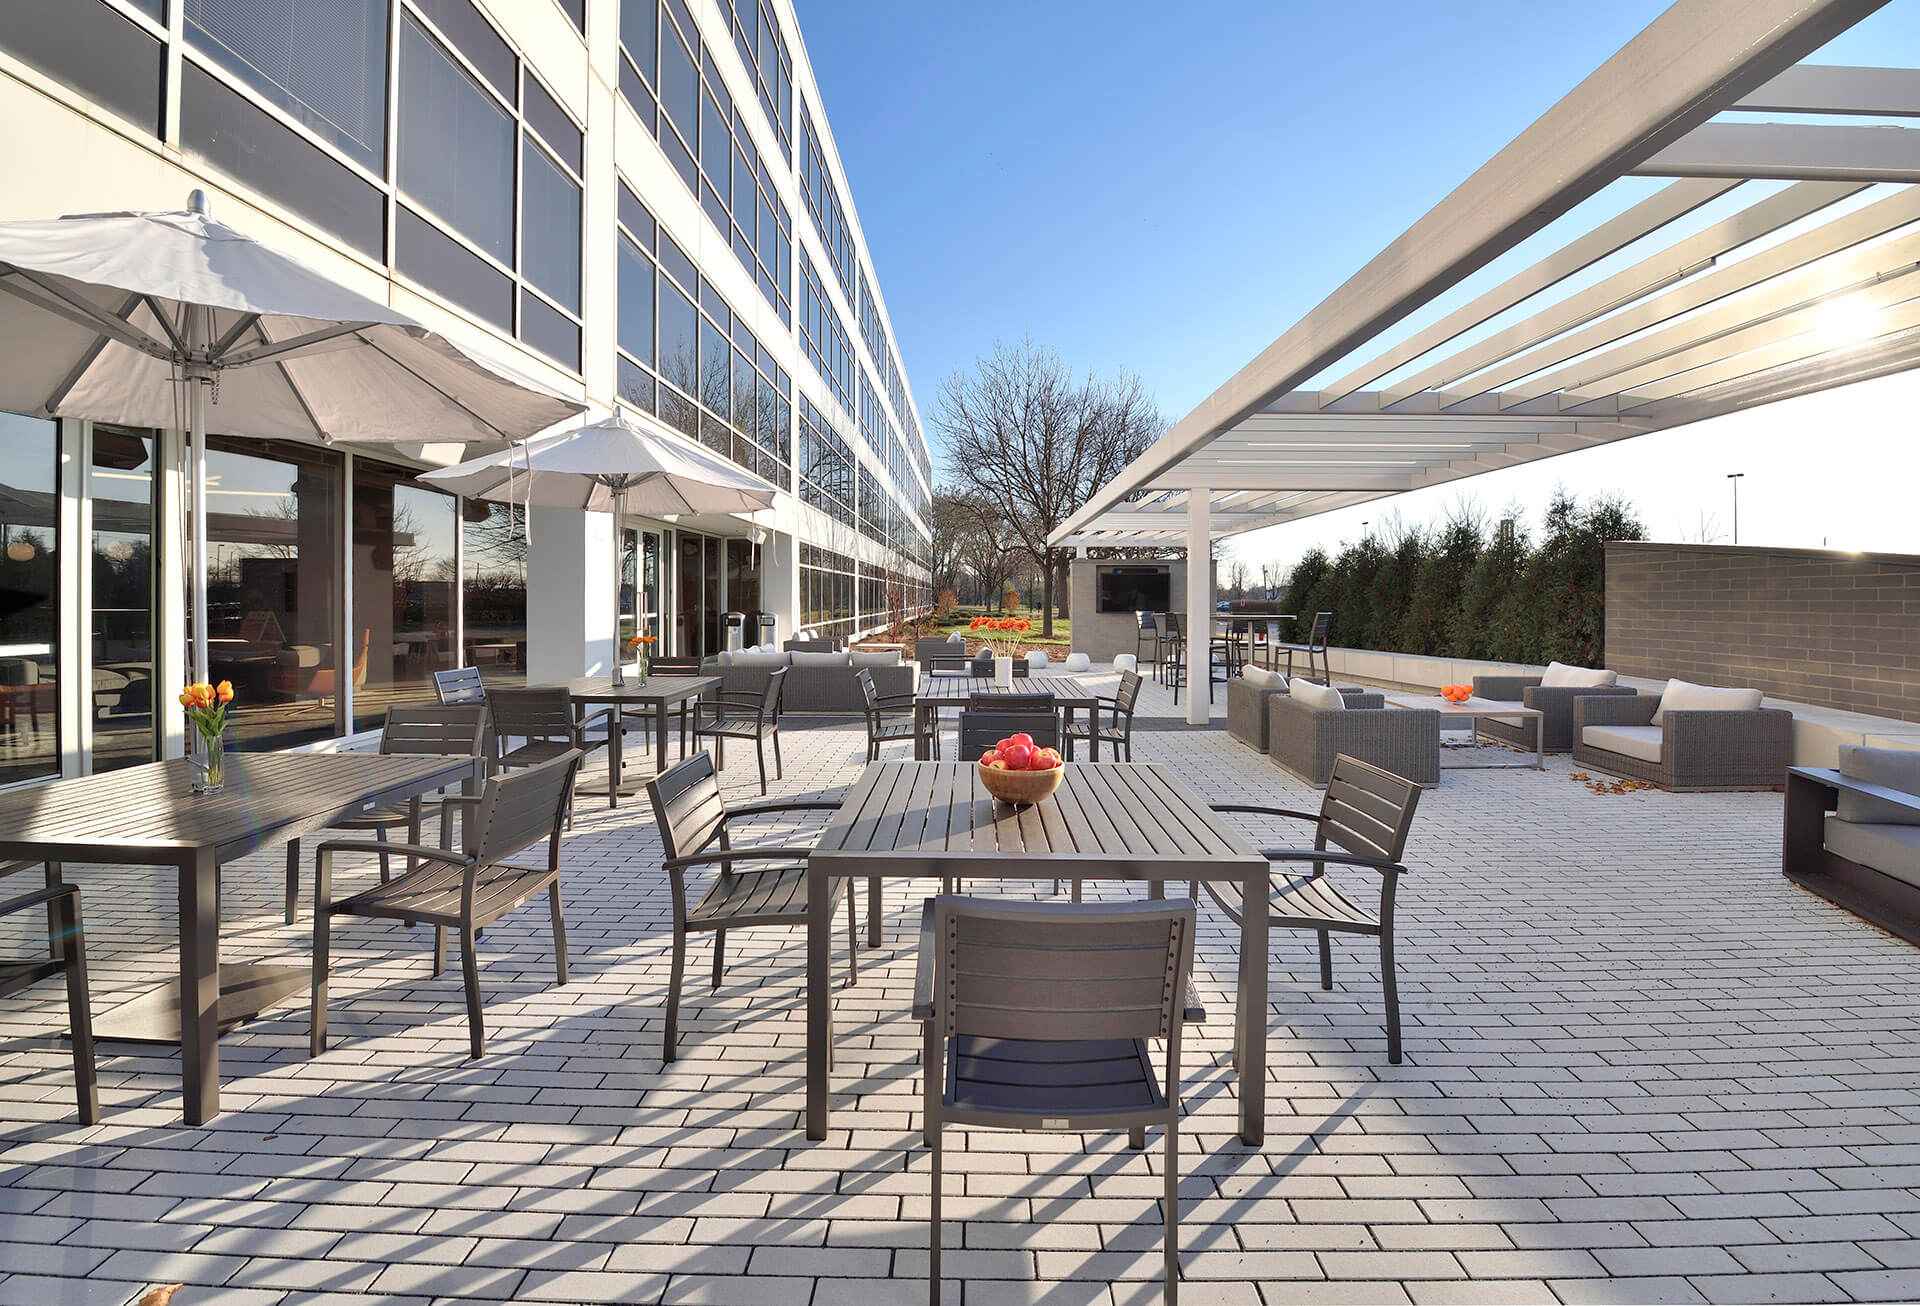 Outdoor patio area with tables, chairs, tv and pergola at Schaumburg Corporate Center